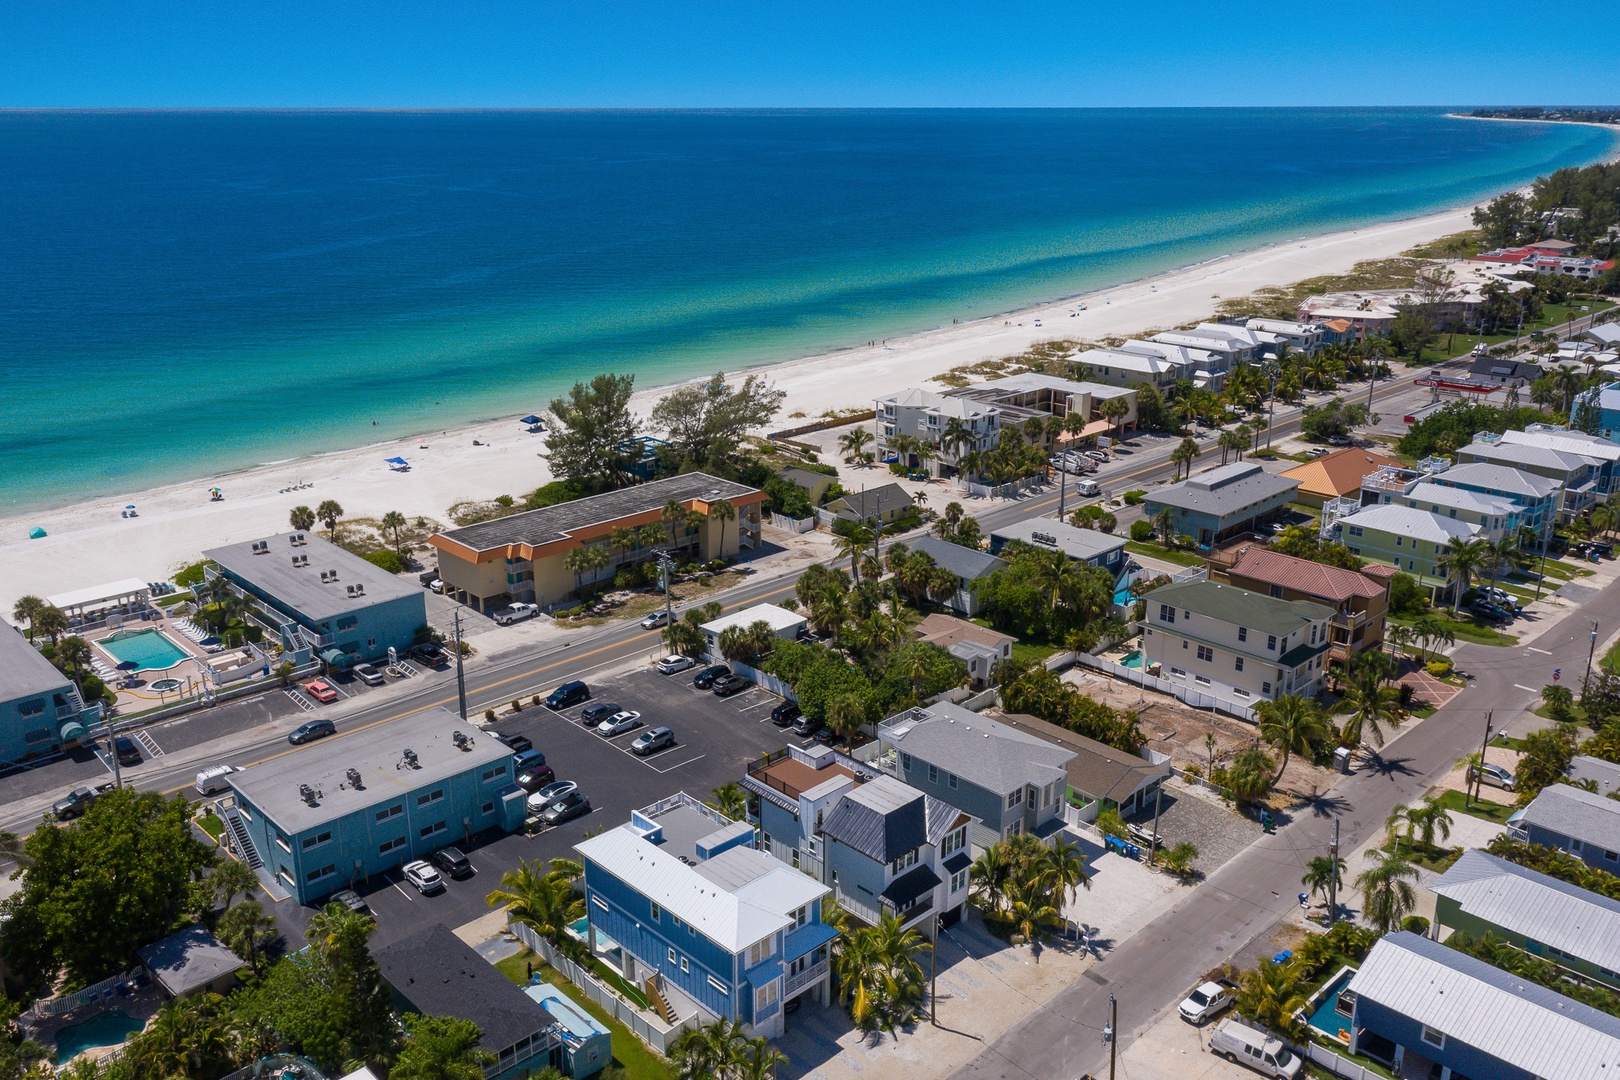 What A Catch - By Anna Maria Island Accommodations